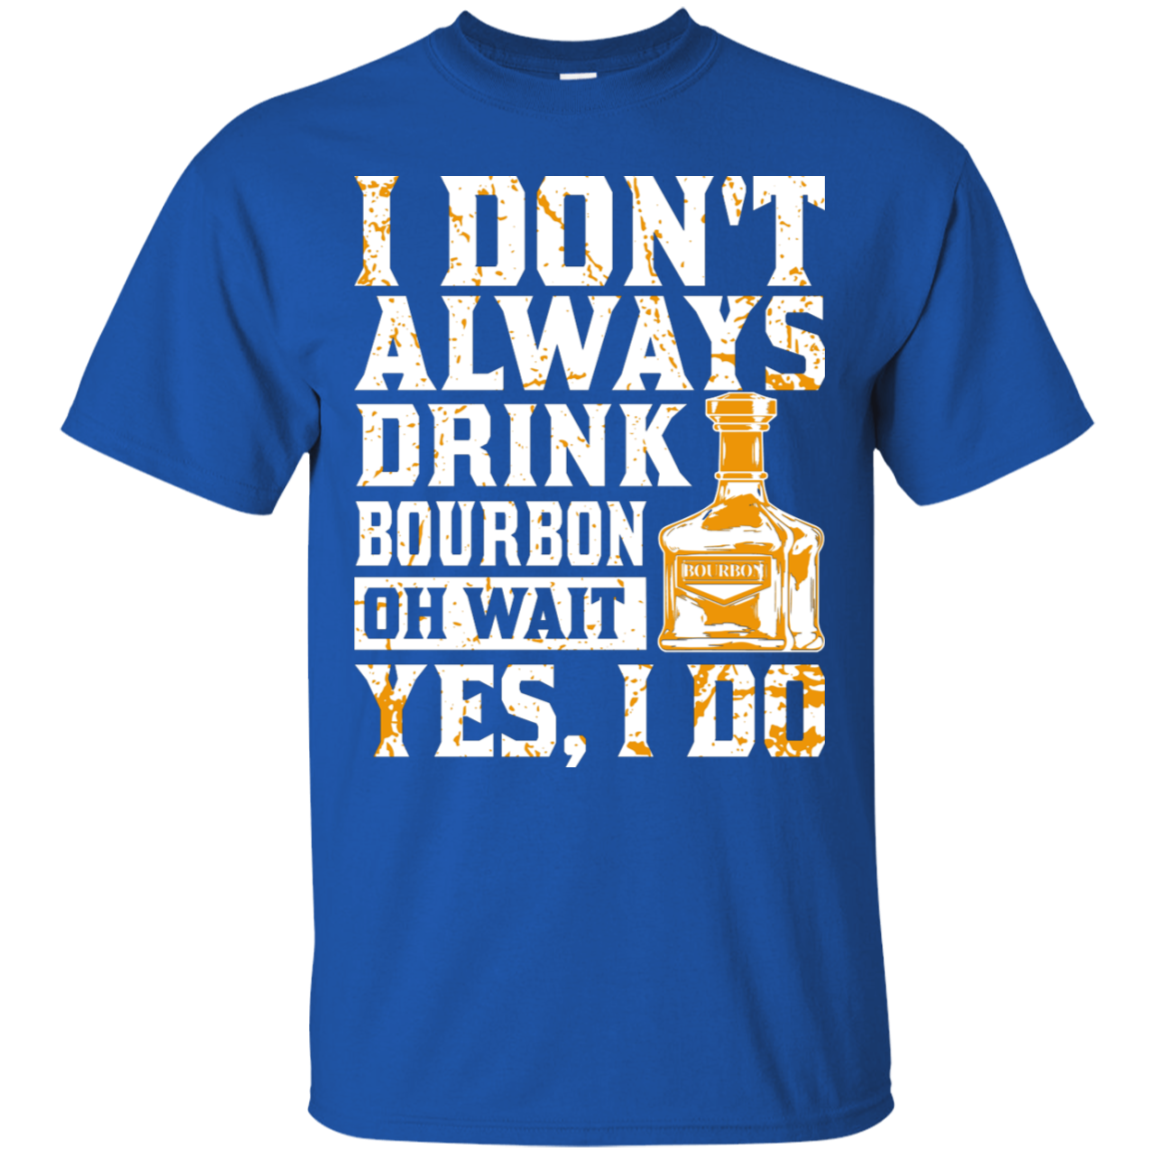 I Don't Always Drink Bourbon T-Shirt Apparel - The Beer Lodge